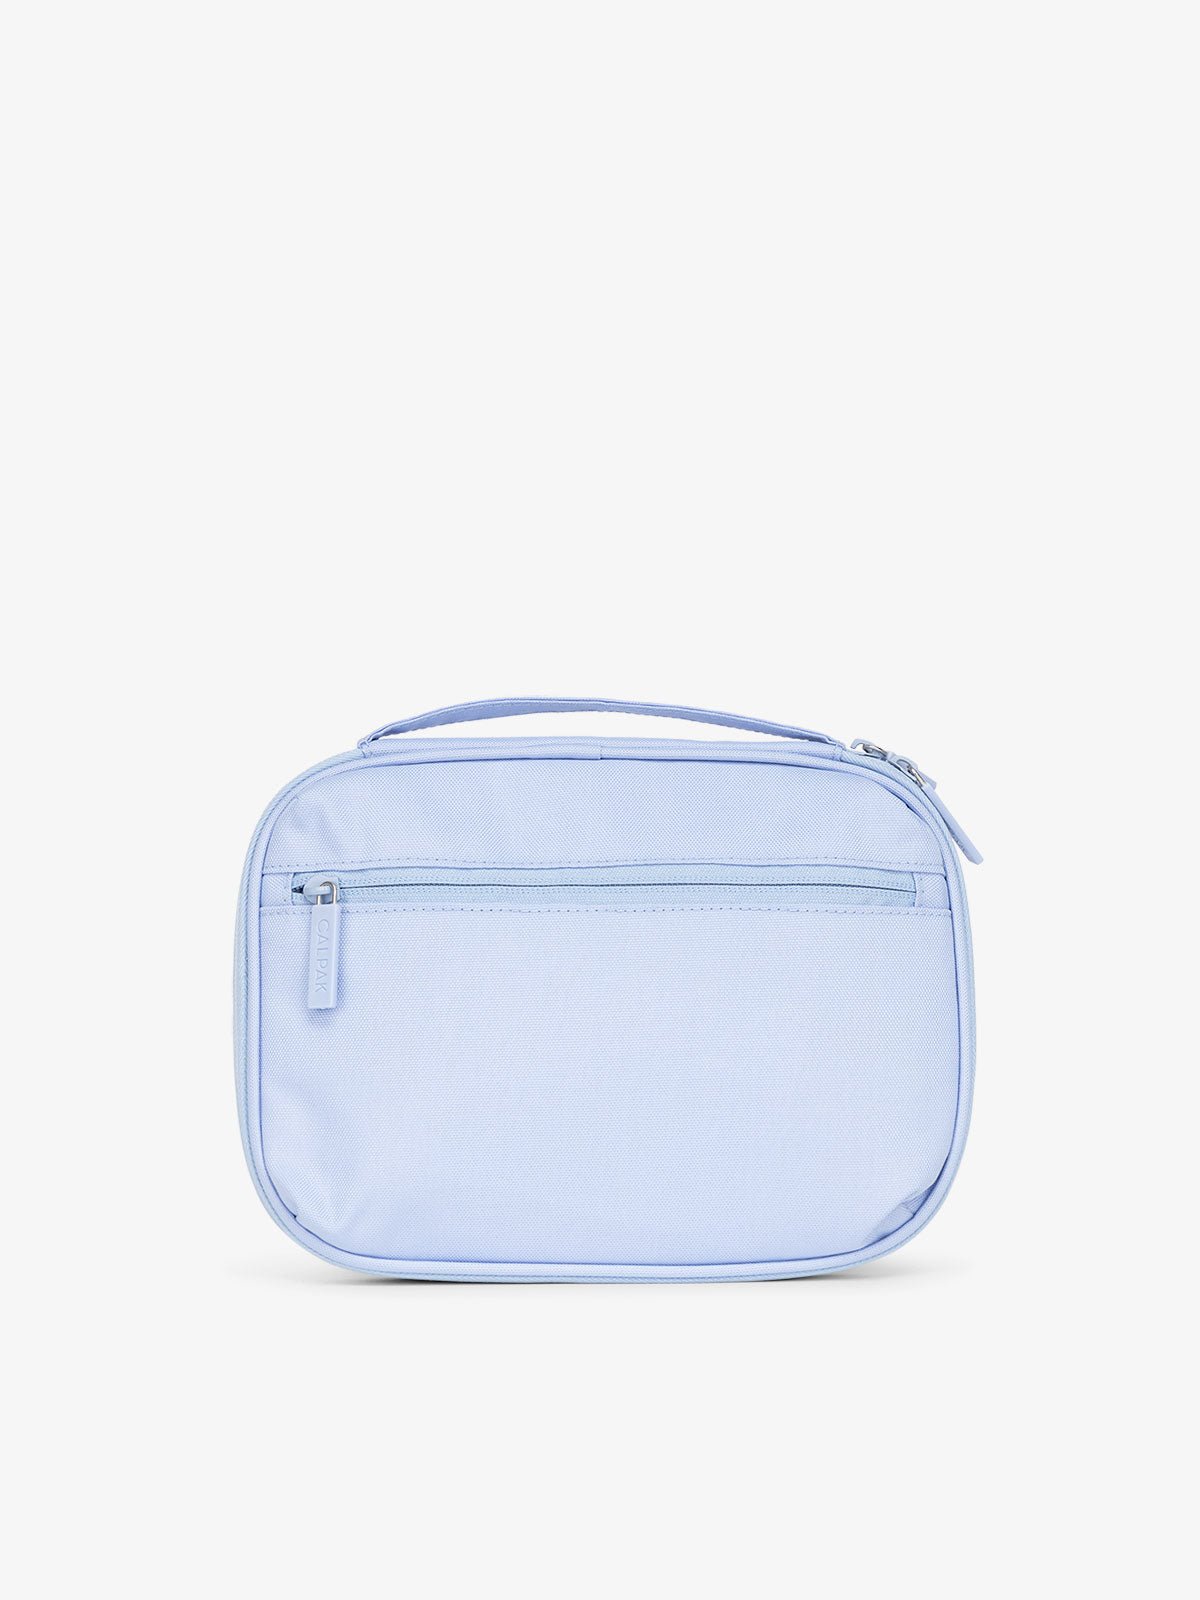 CALPAK tech and cables organizer bag in light blue